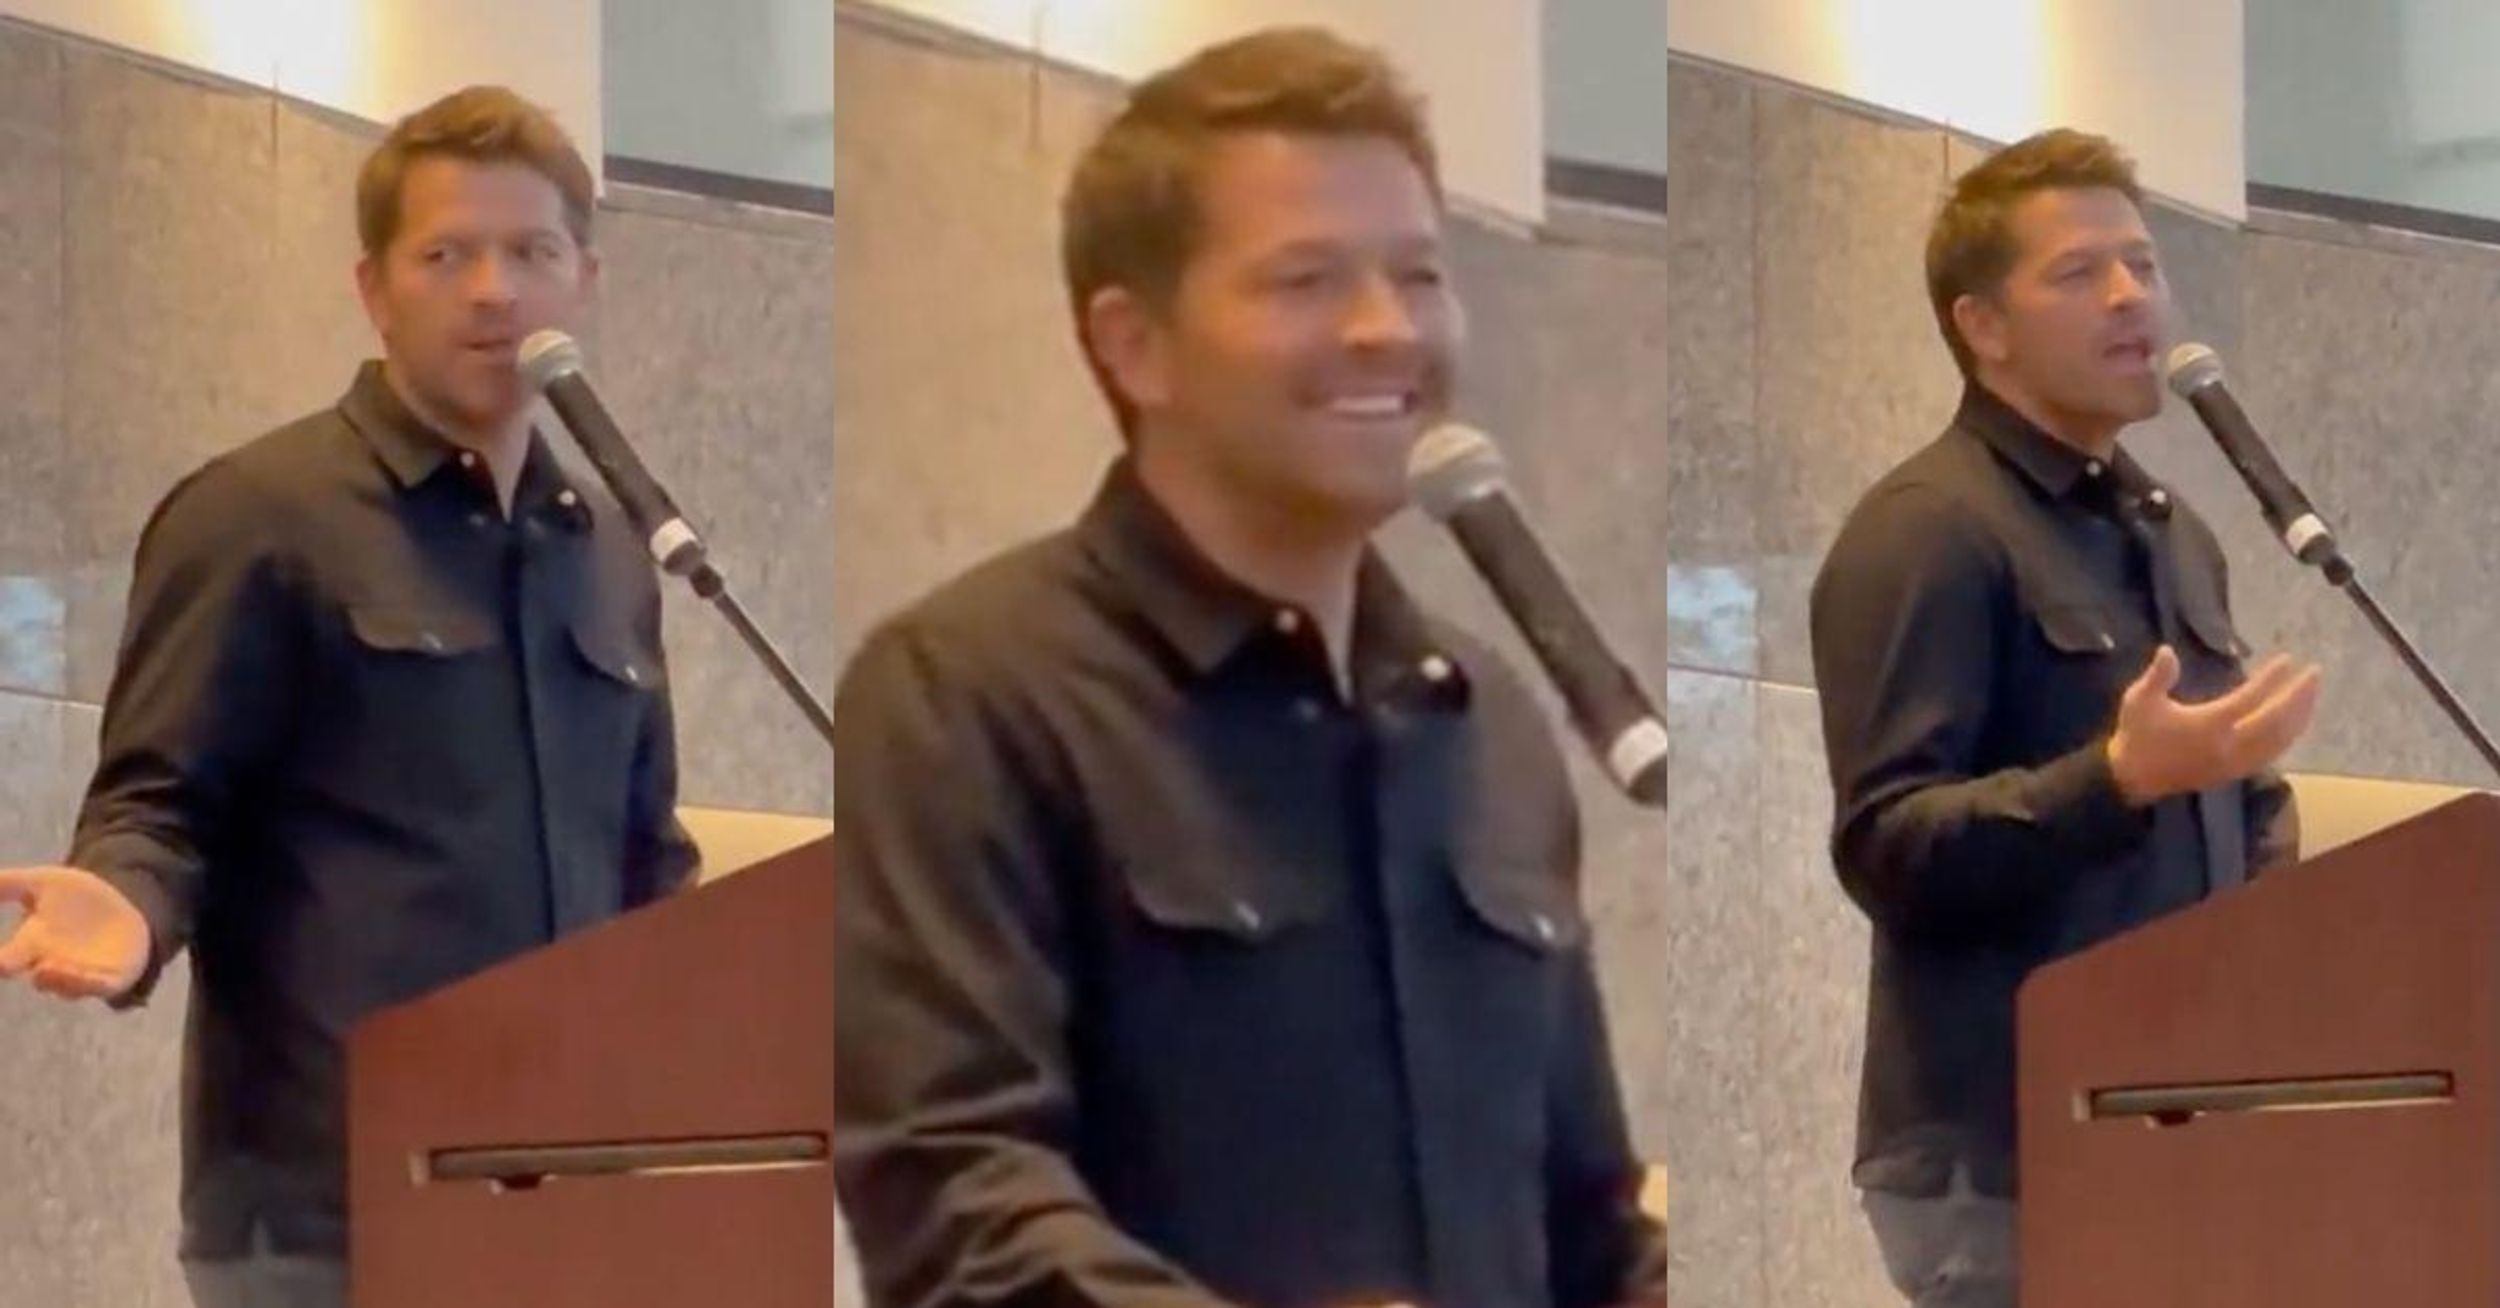 'Supernatural' Star Misha Collins Backtracks And Apologizes After Appearing To Come Out As Bisexual